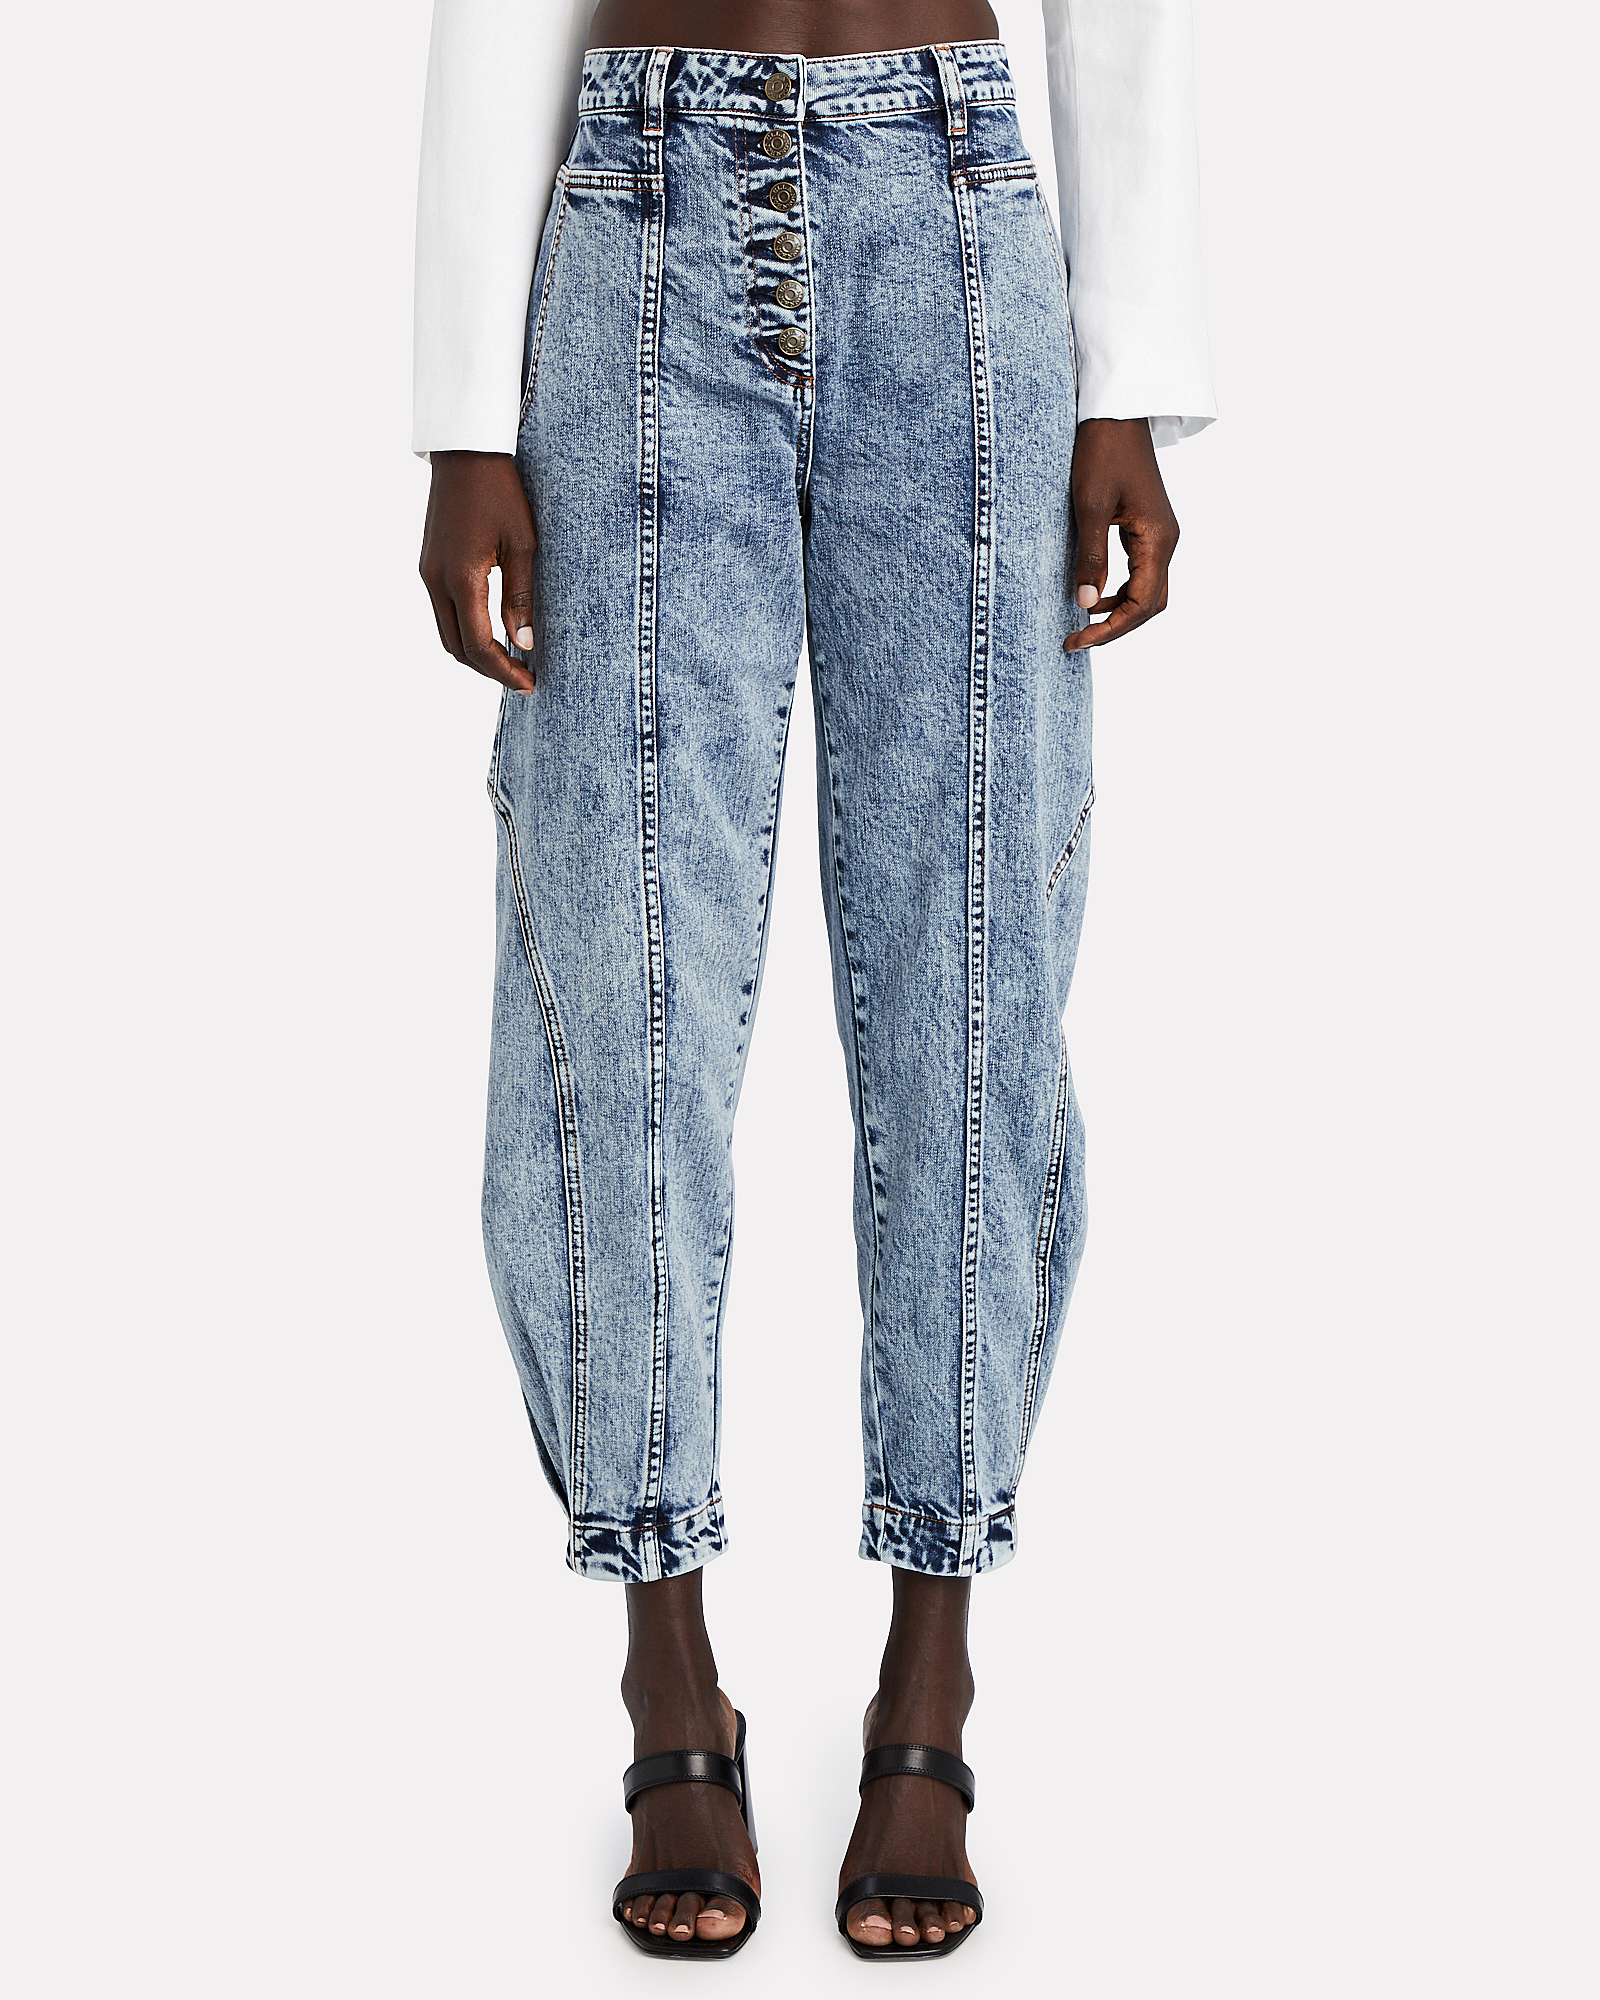 Ulla Johnson Brodie Cropped High-Rise Jeans | INTERMIX®